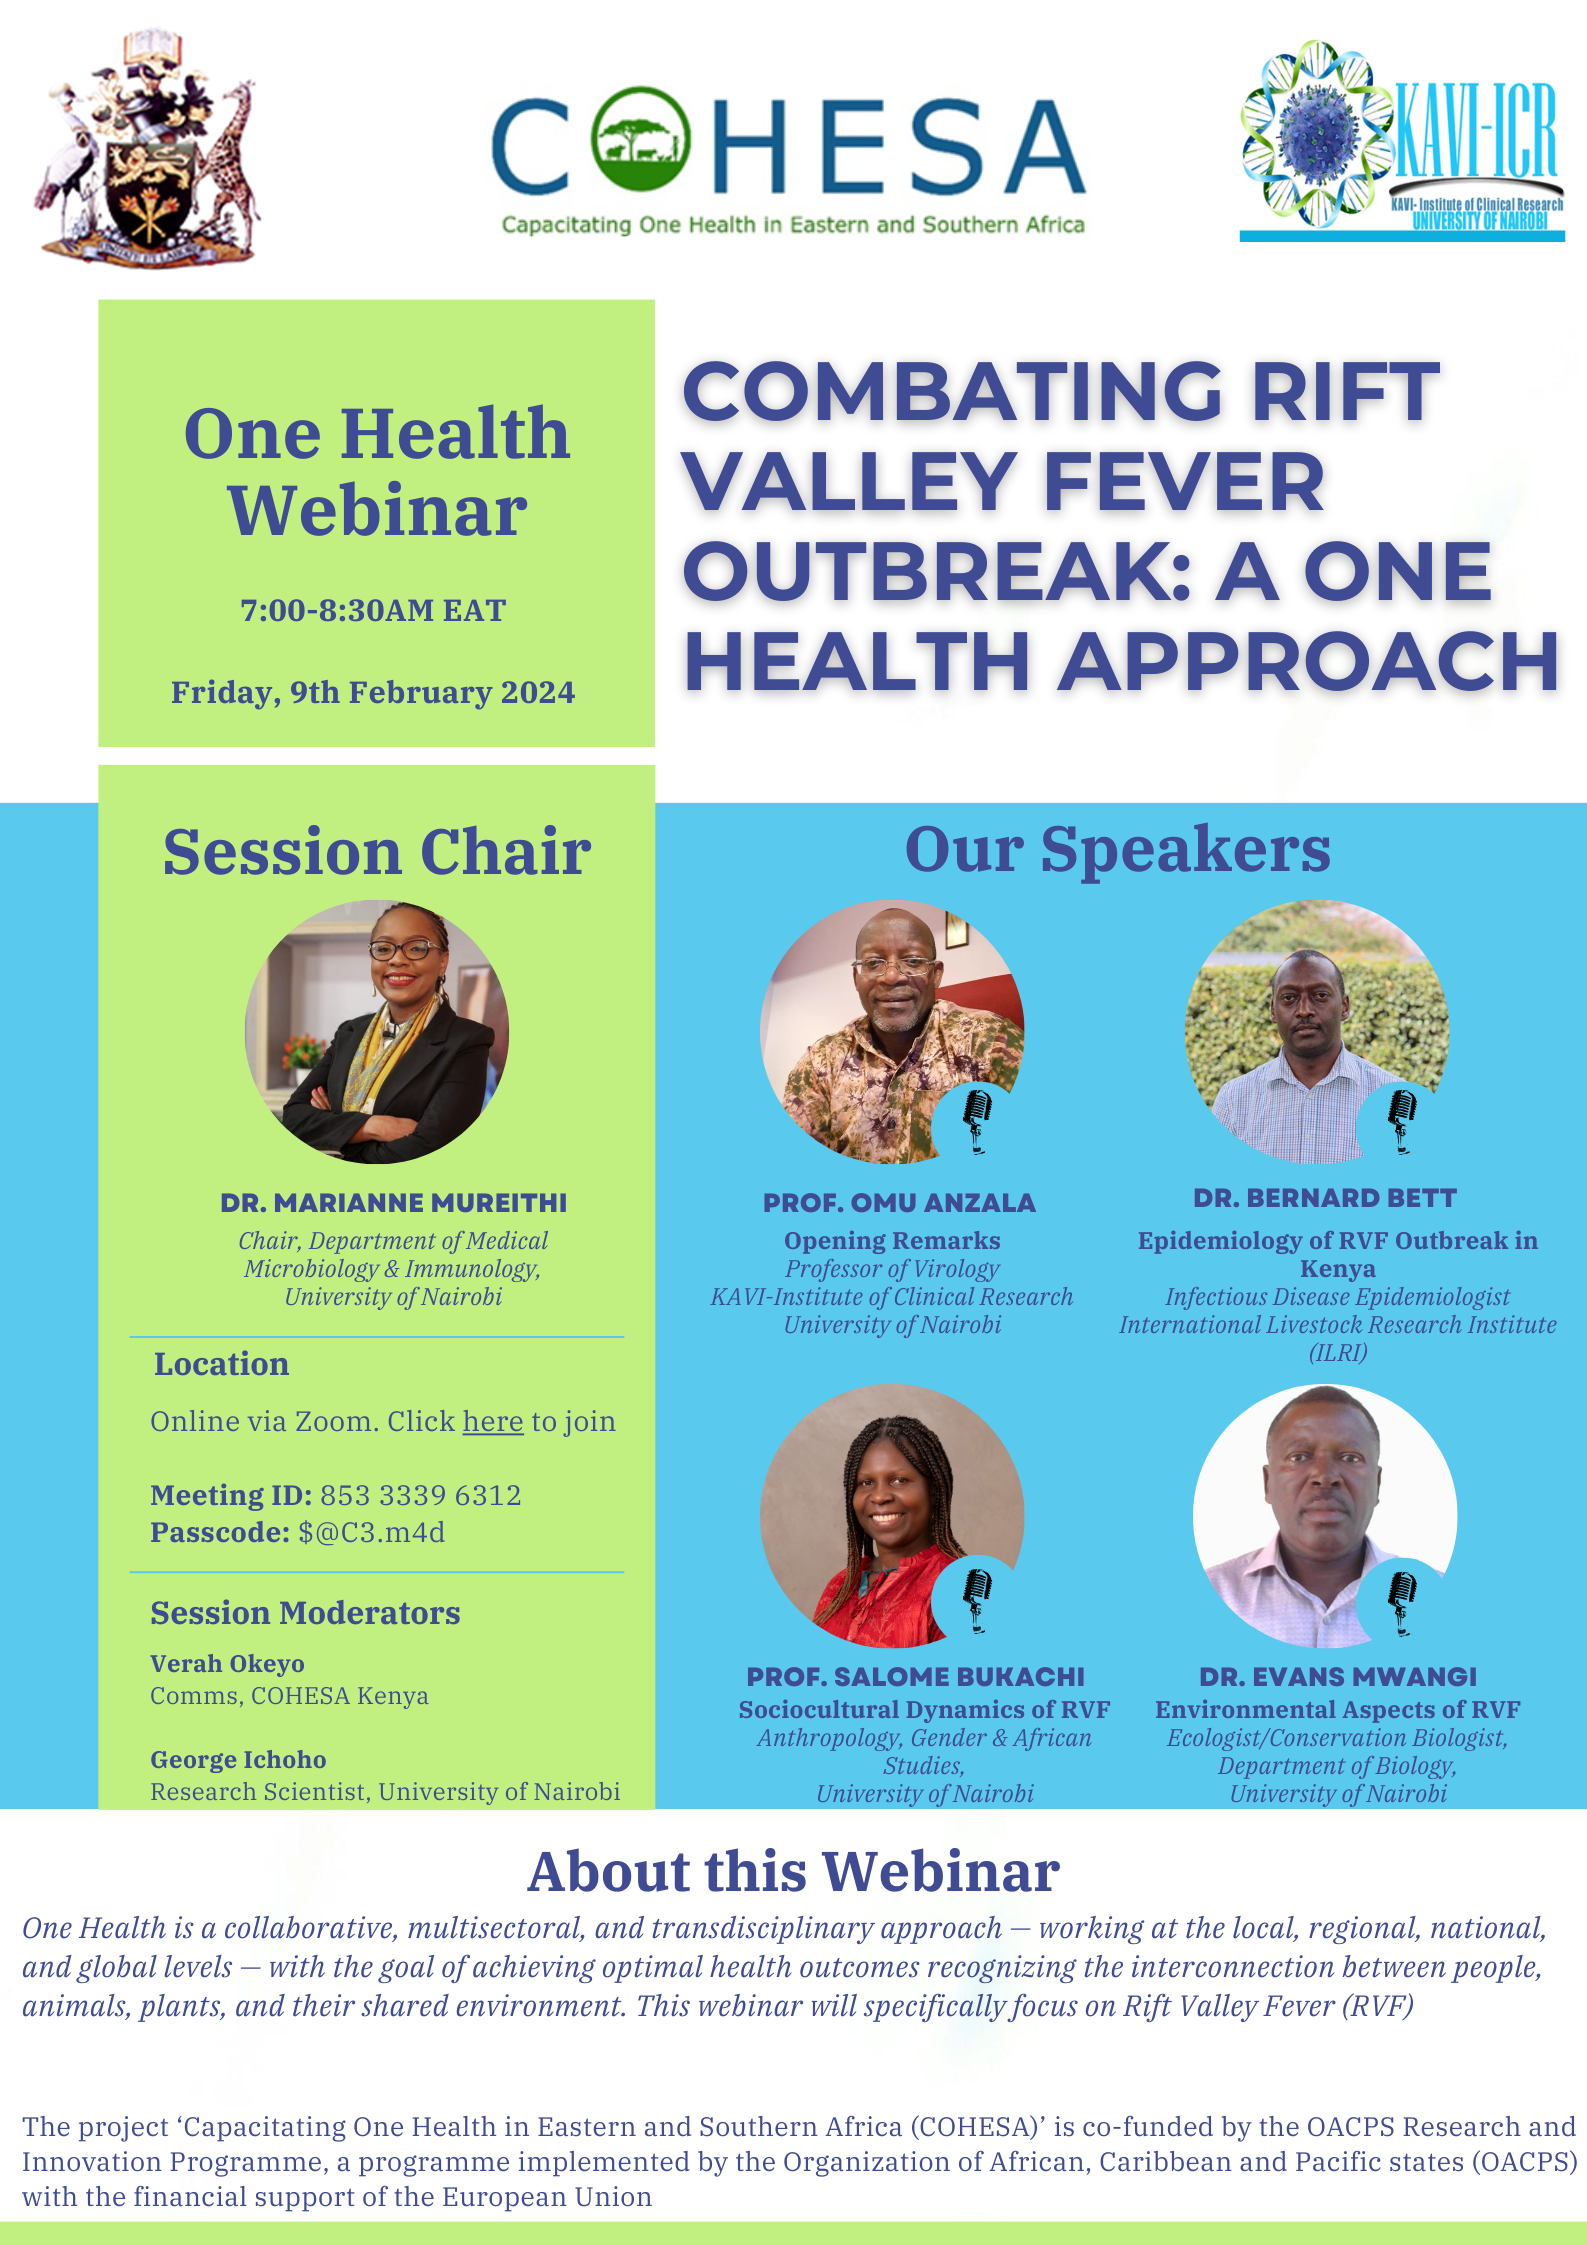 Rift Valley Fever in Focus: Combating the Outbreak through One Health Collaboration